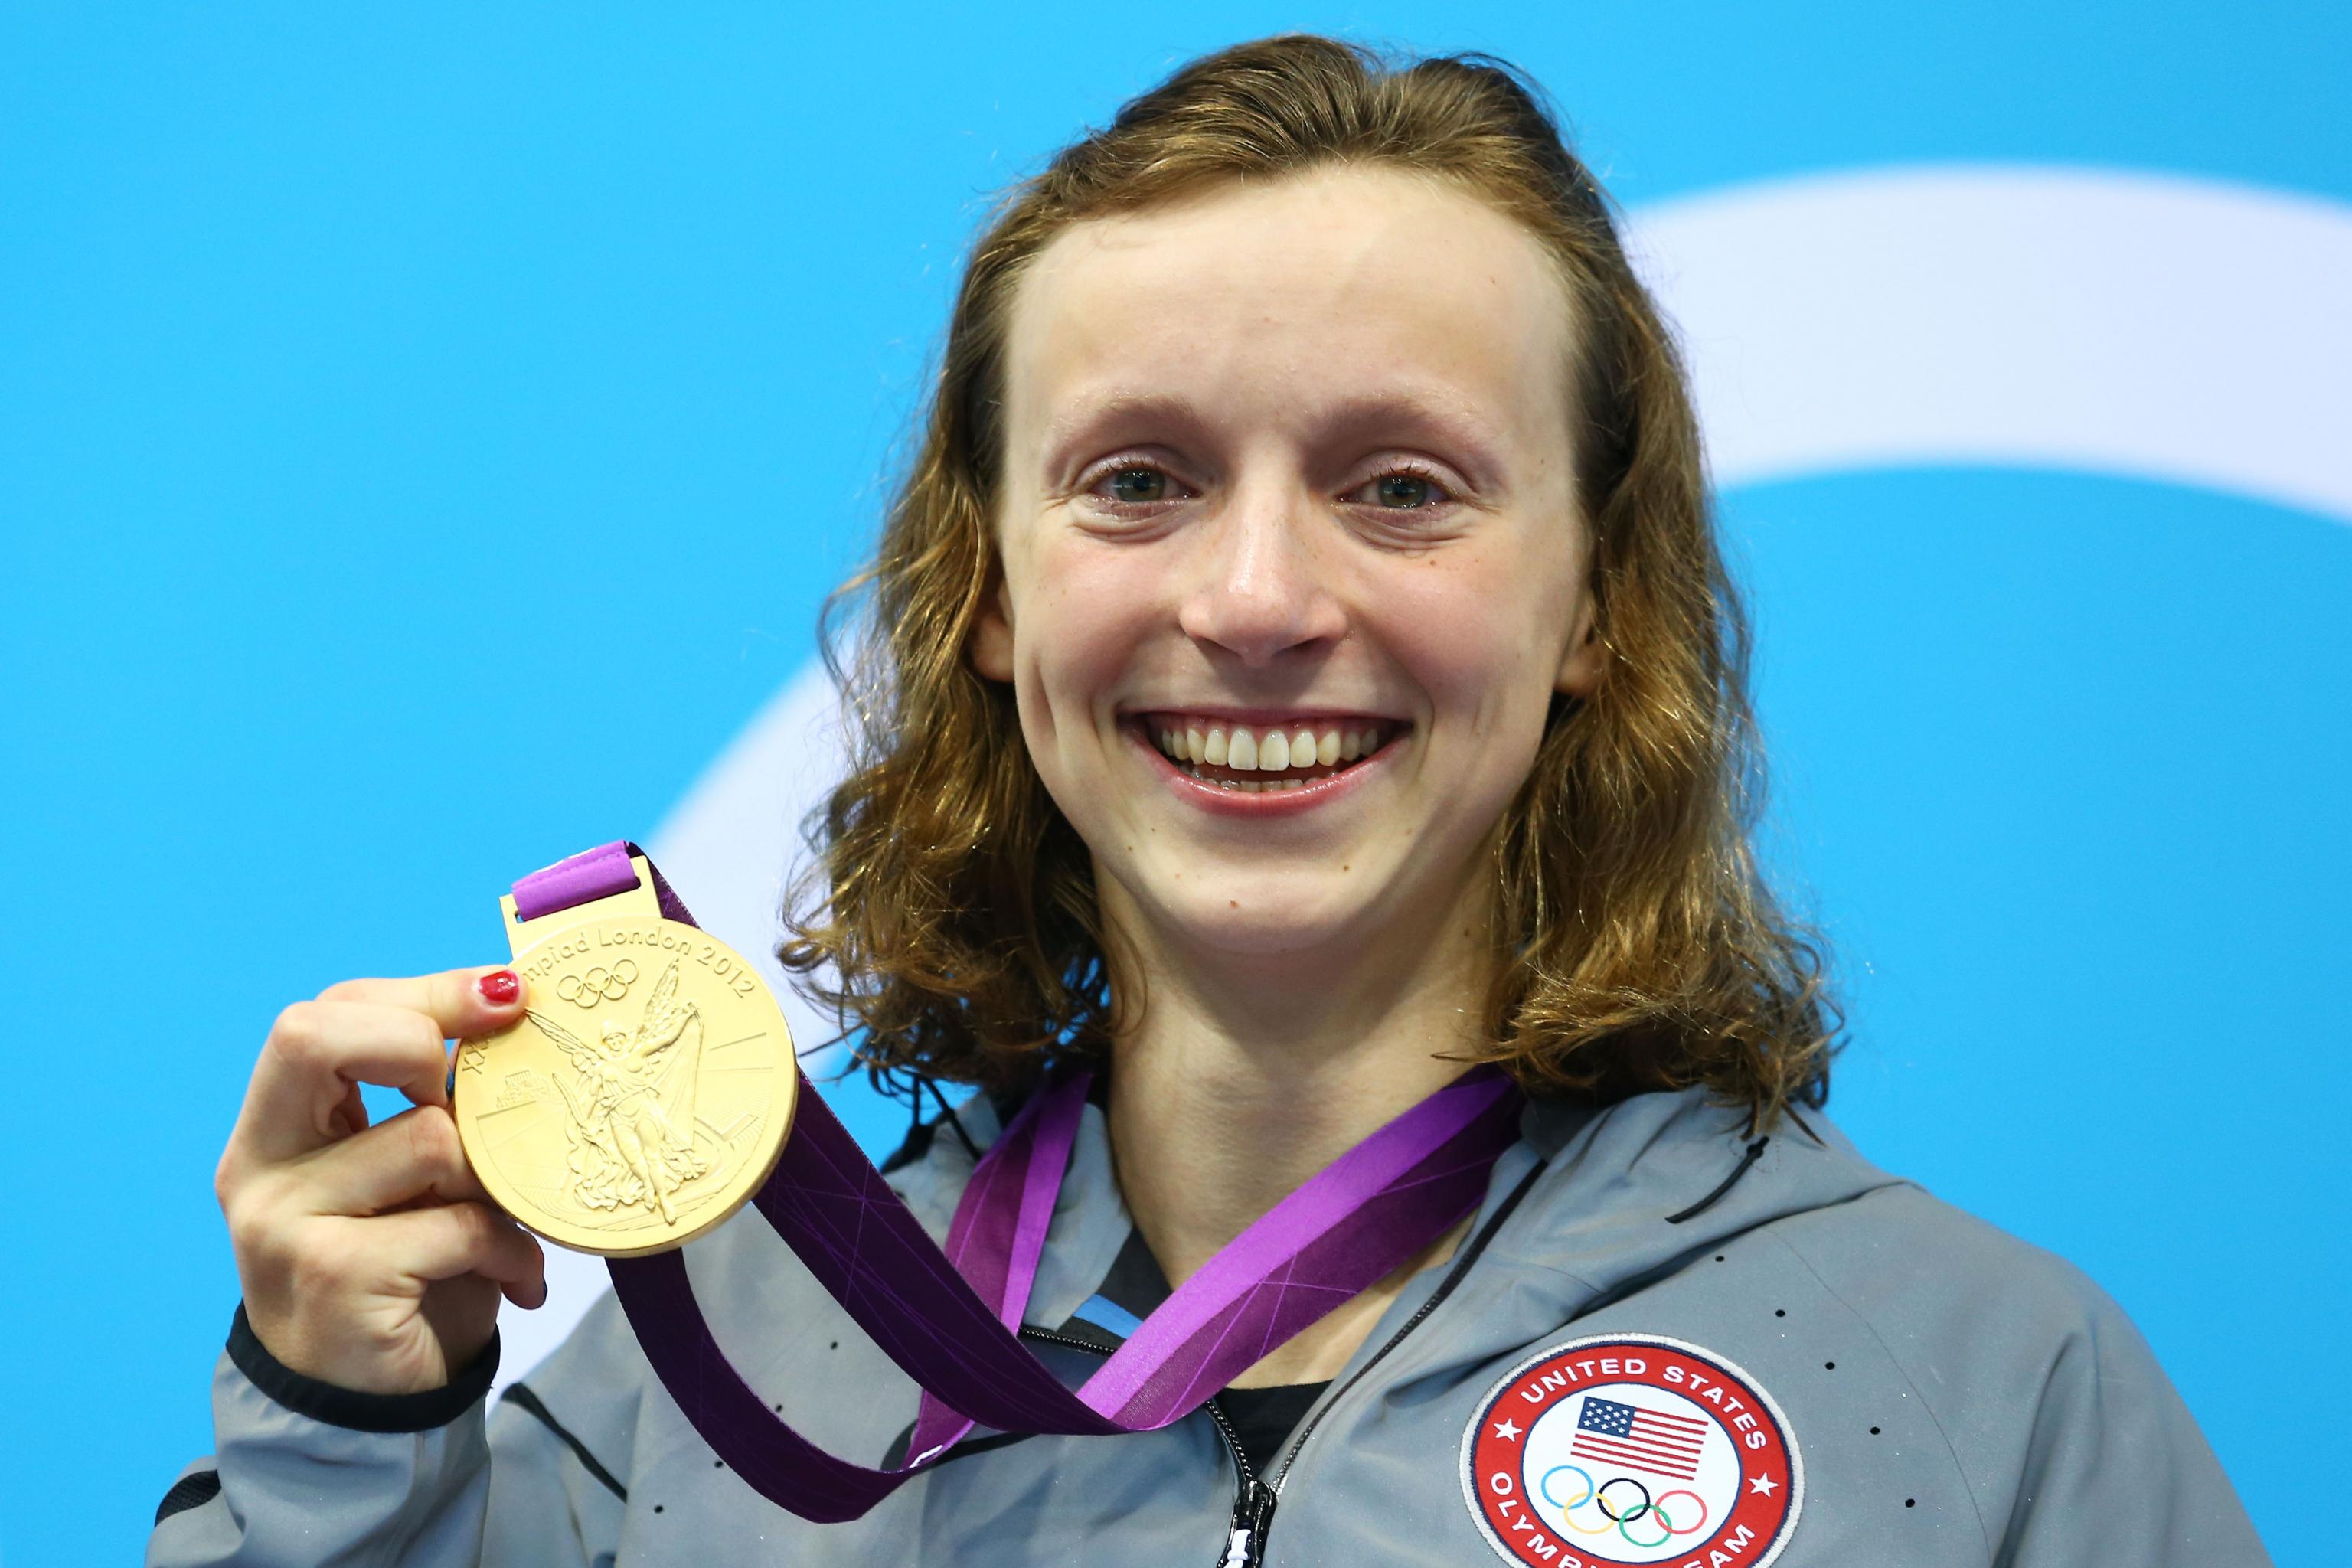 Even Olympic gold medalist Katie Ledecky was impressed by Trea